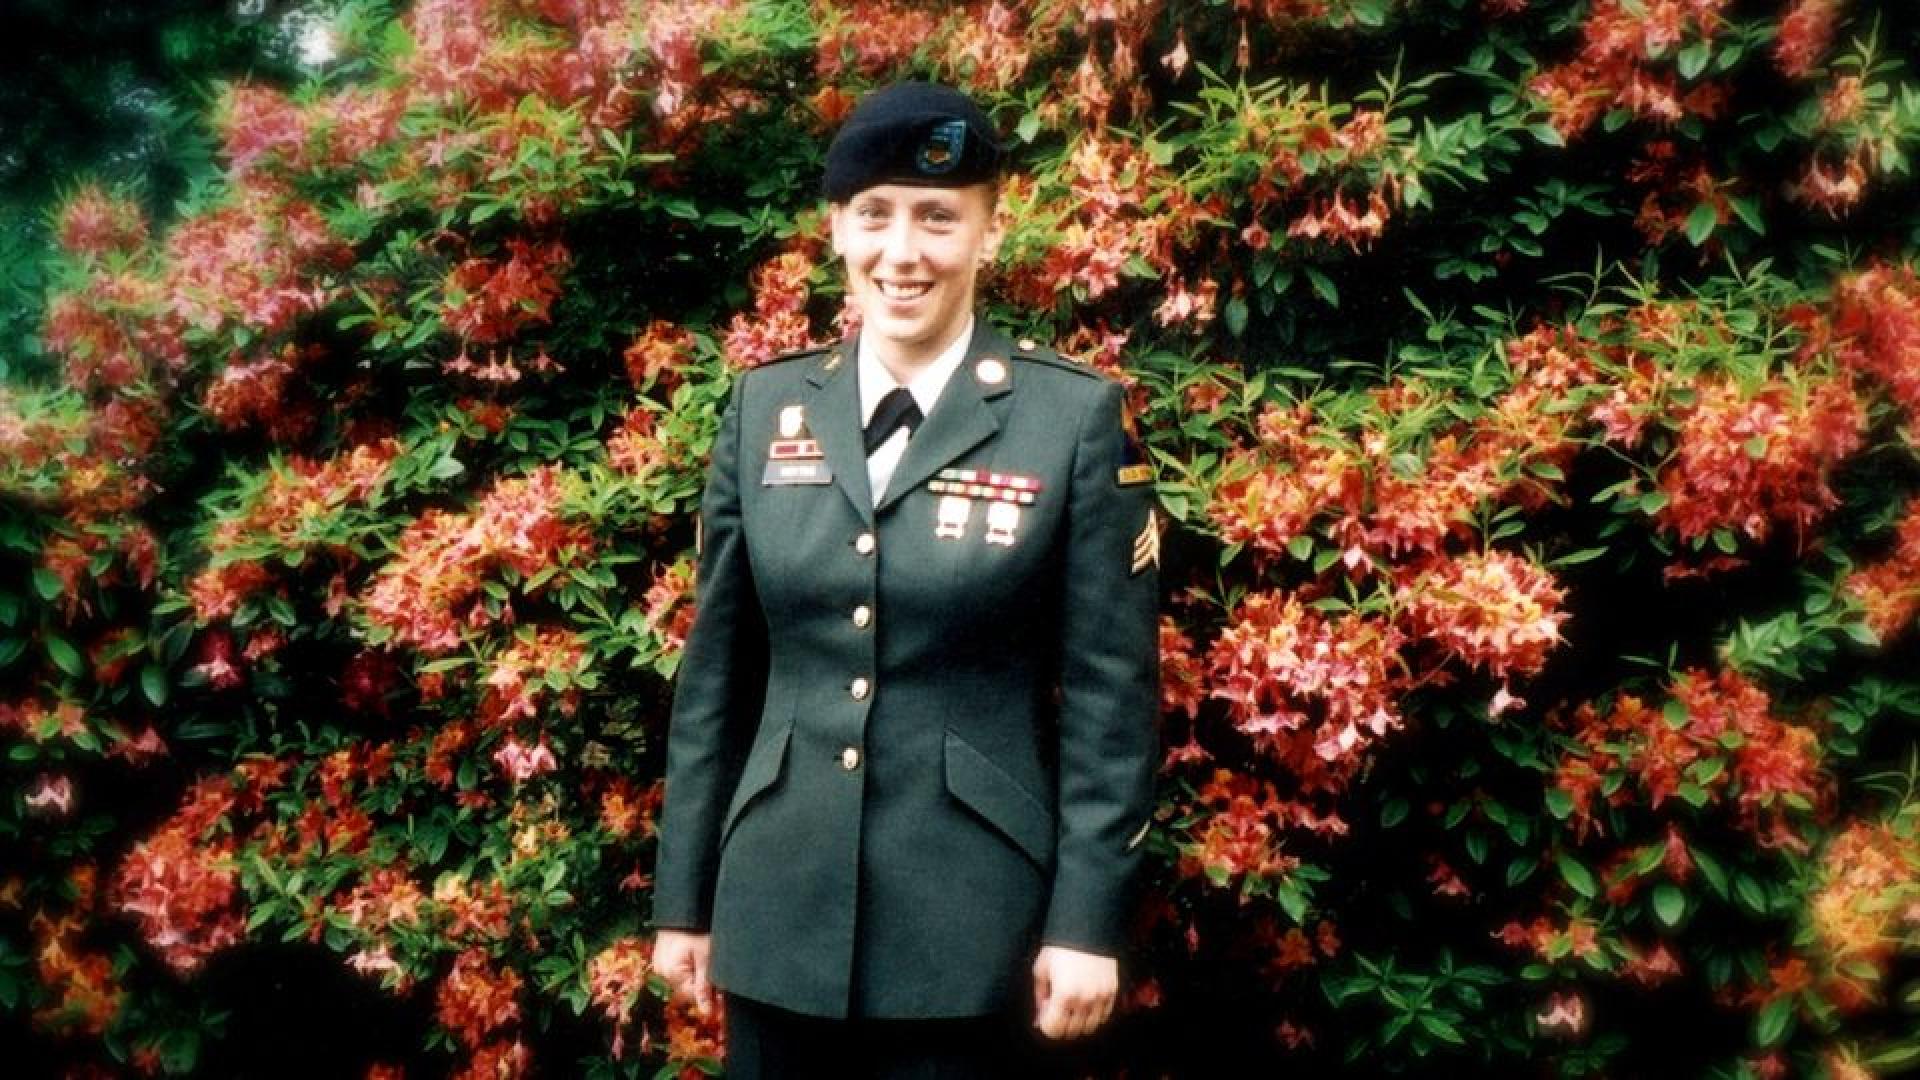 Angela Peacock, a young woman, stands in her Army dress uniform in front of a tall bright red and dark green azalea.